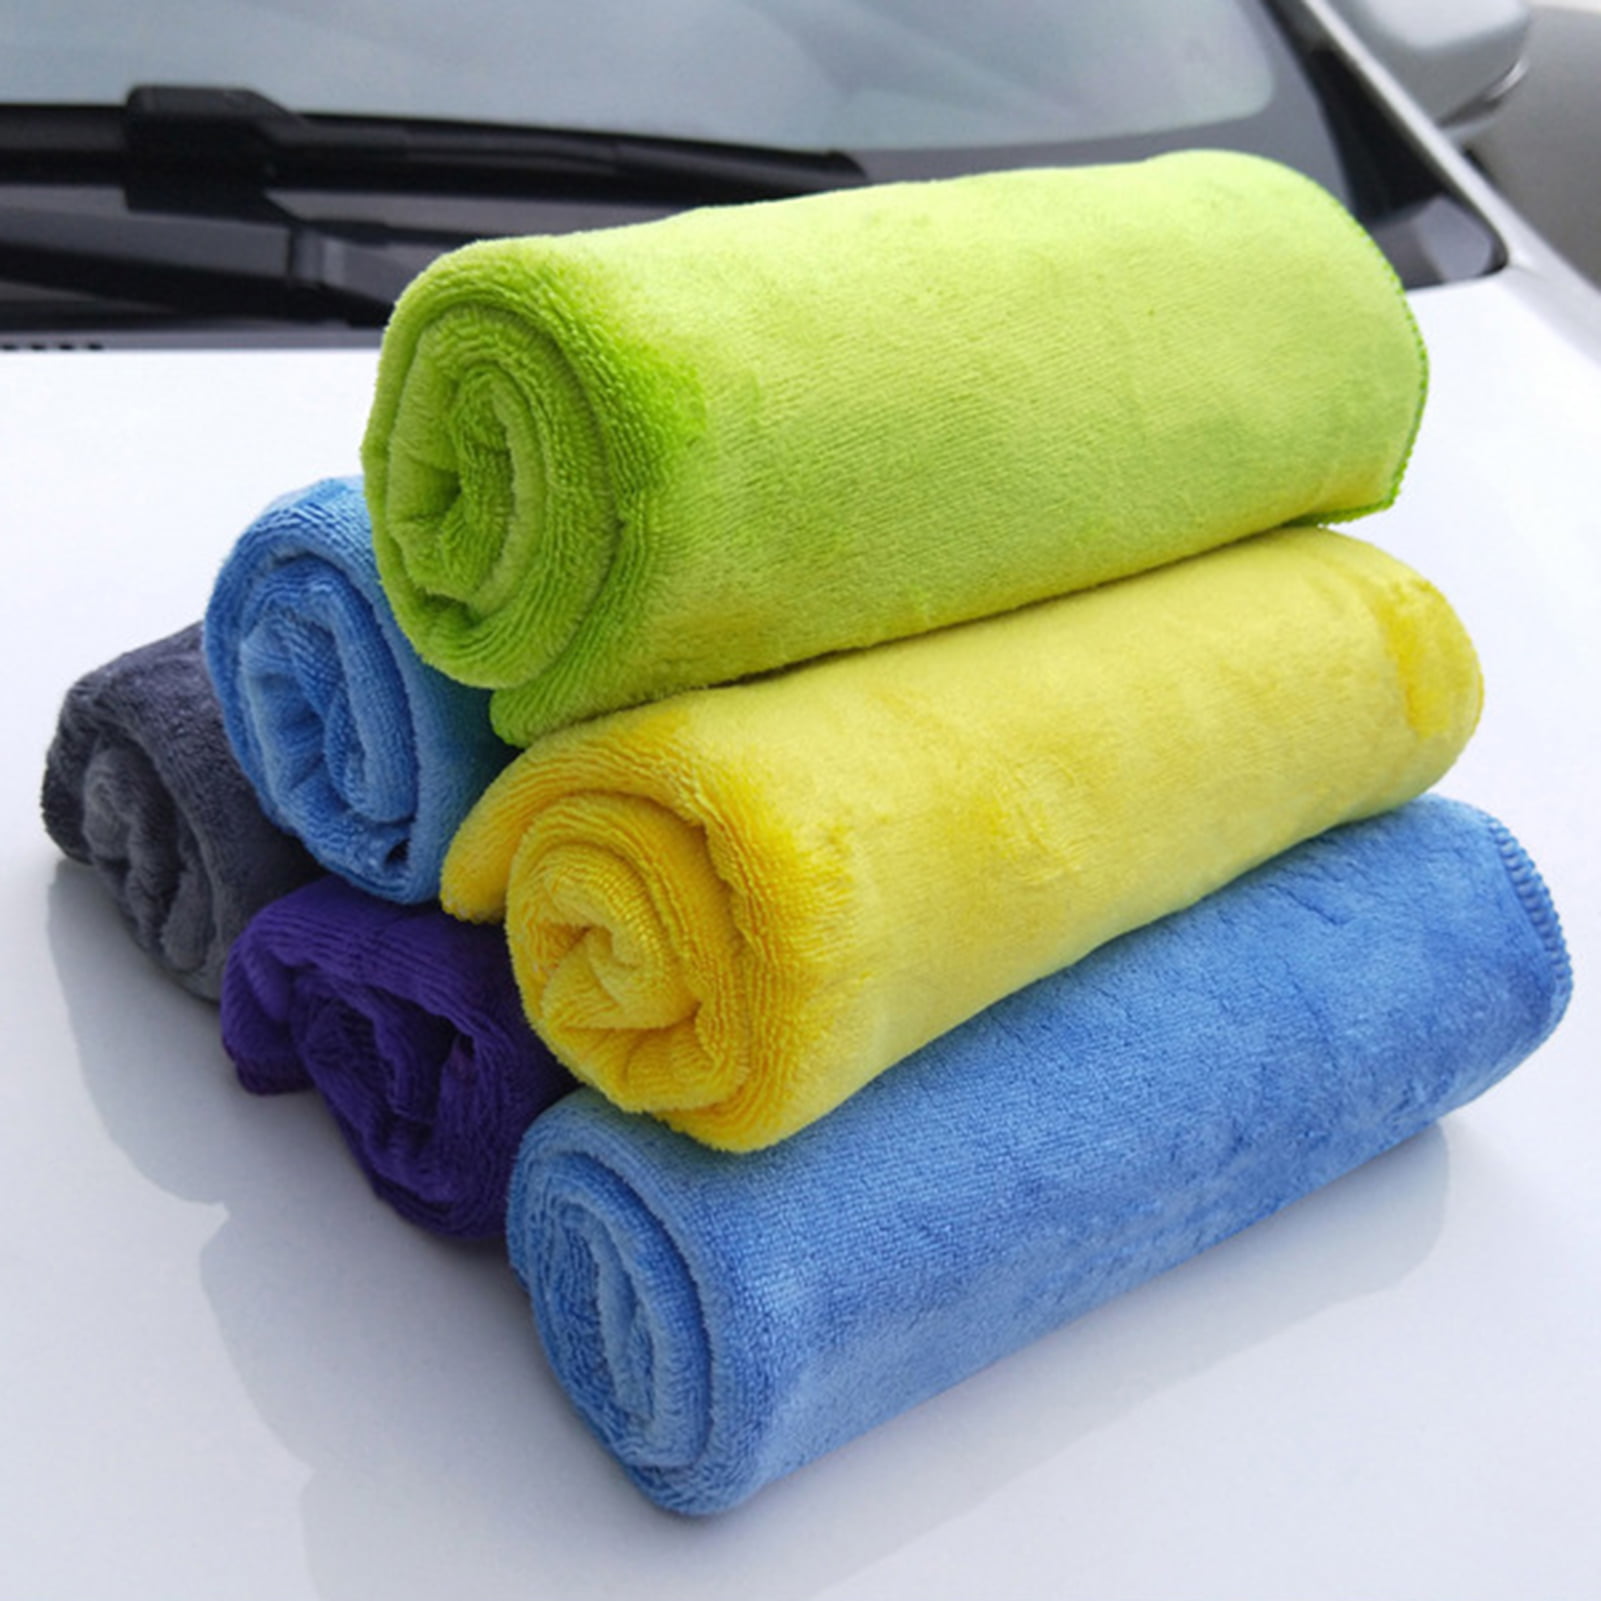 Car Wash Microfiber Towel Car Cleaning Drying Cloth Large Size Detailing 40x40 